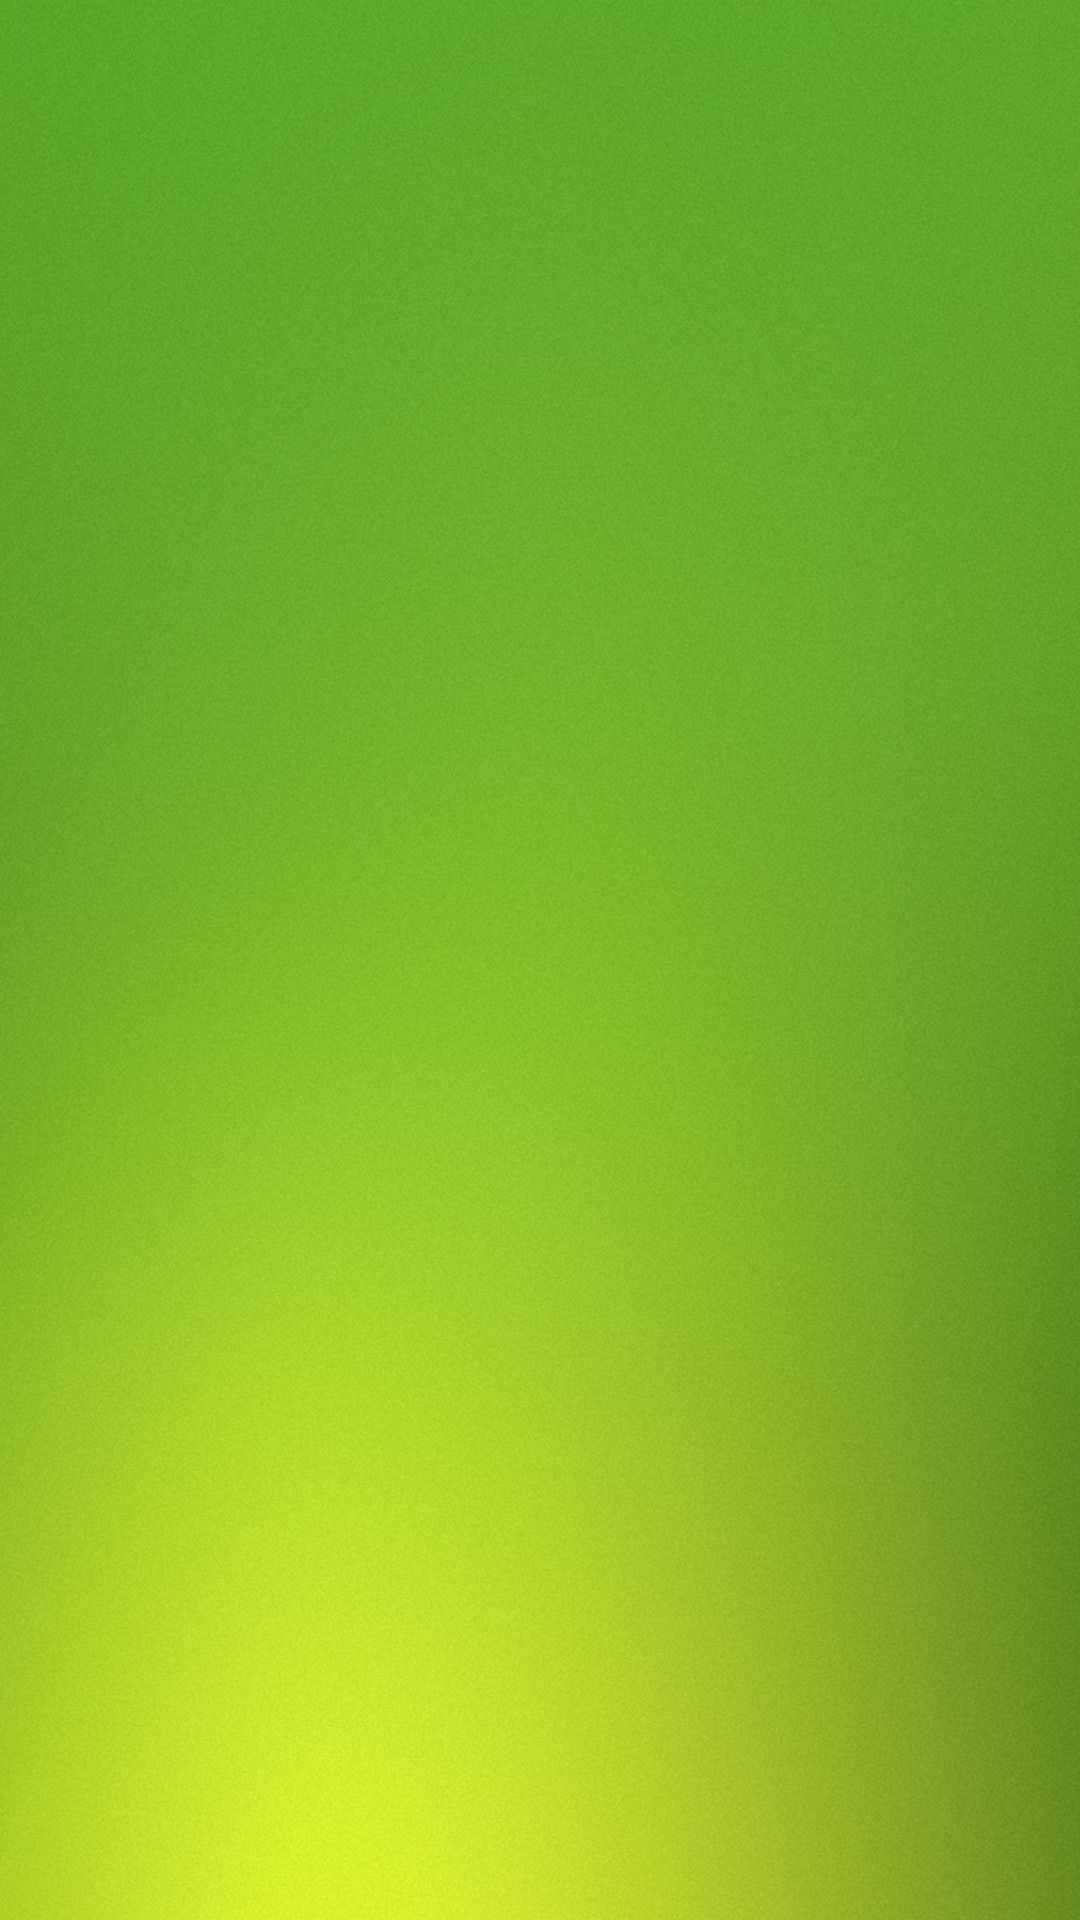 Lime Green Wallpaper Free Lime Green Background